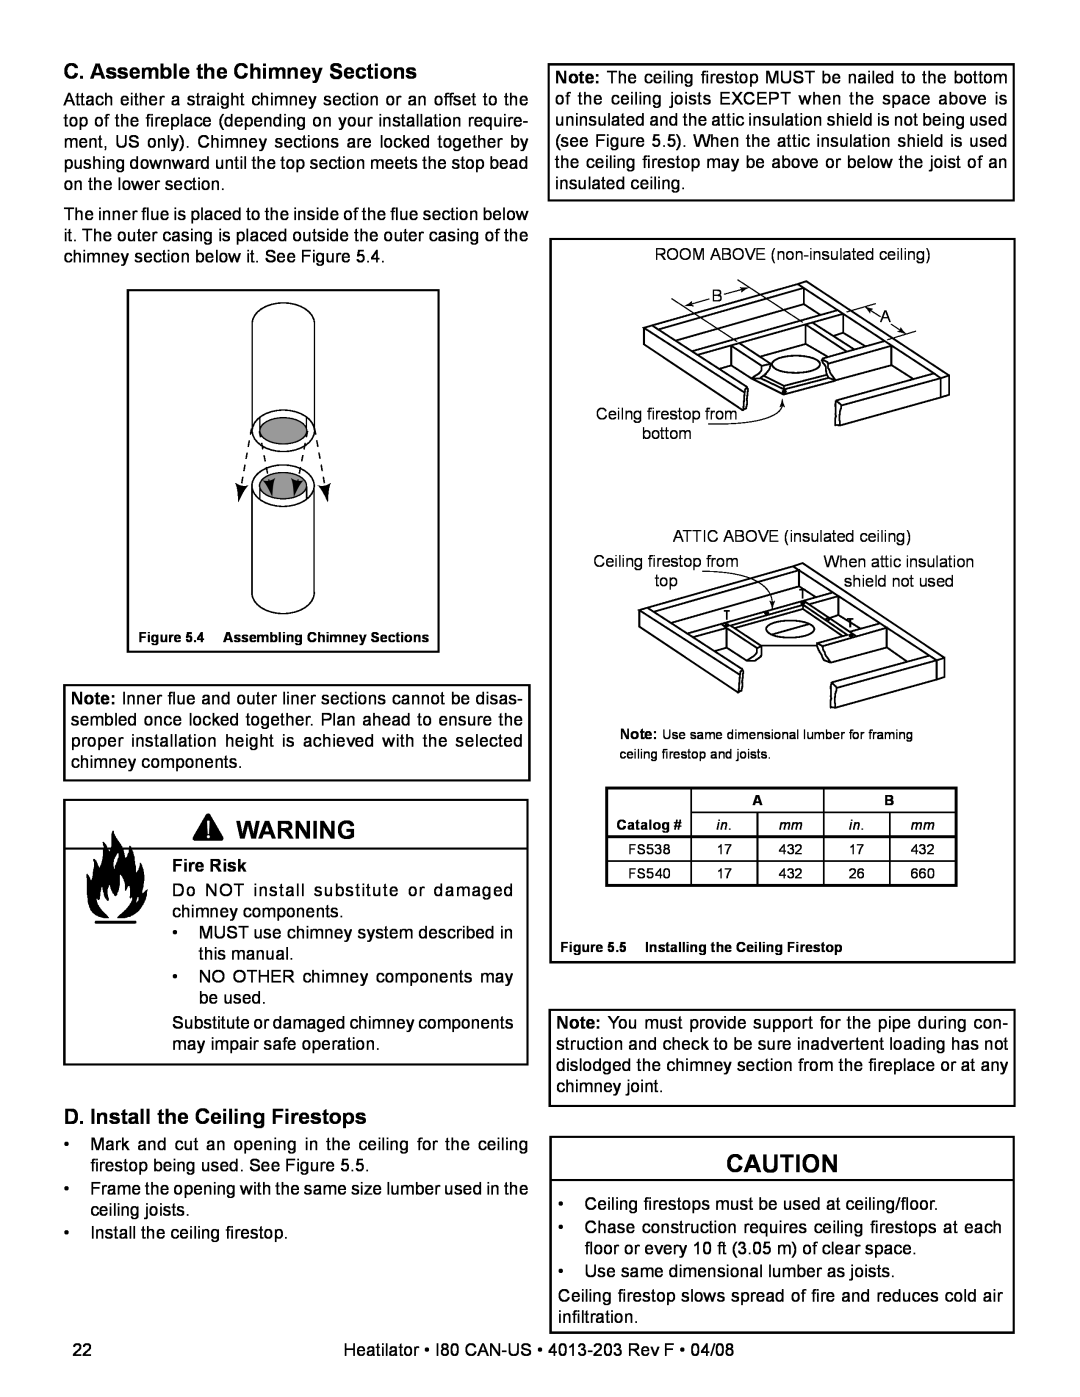 Heatiator I80 owner manual C. Assemble the Chimney Sections, D. Install the Ceiling Firestops, Fire Risk 